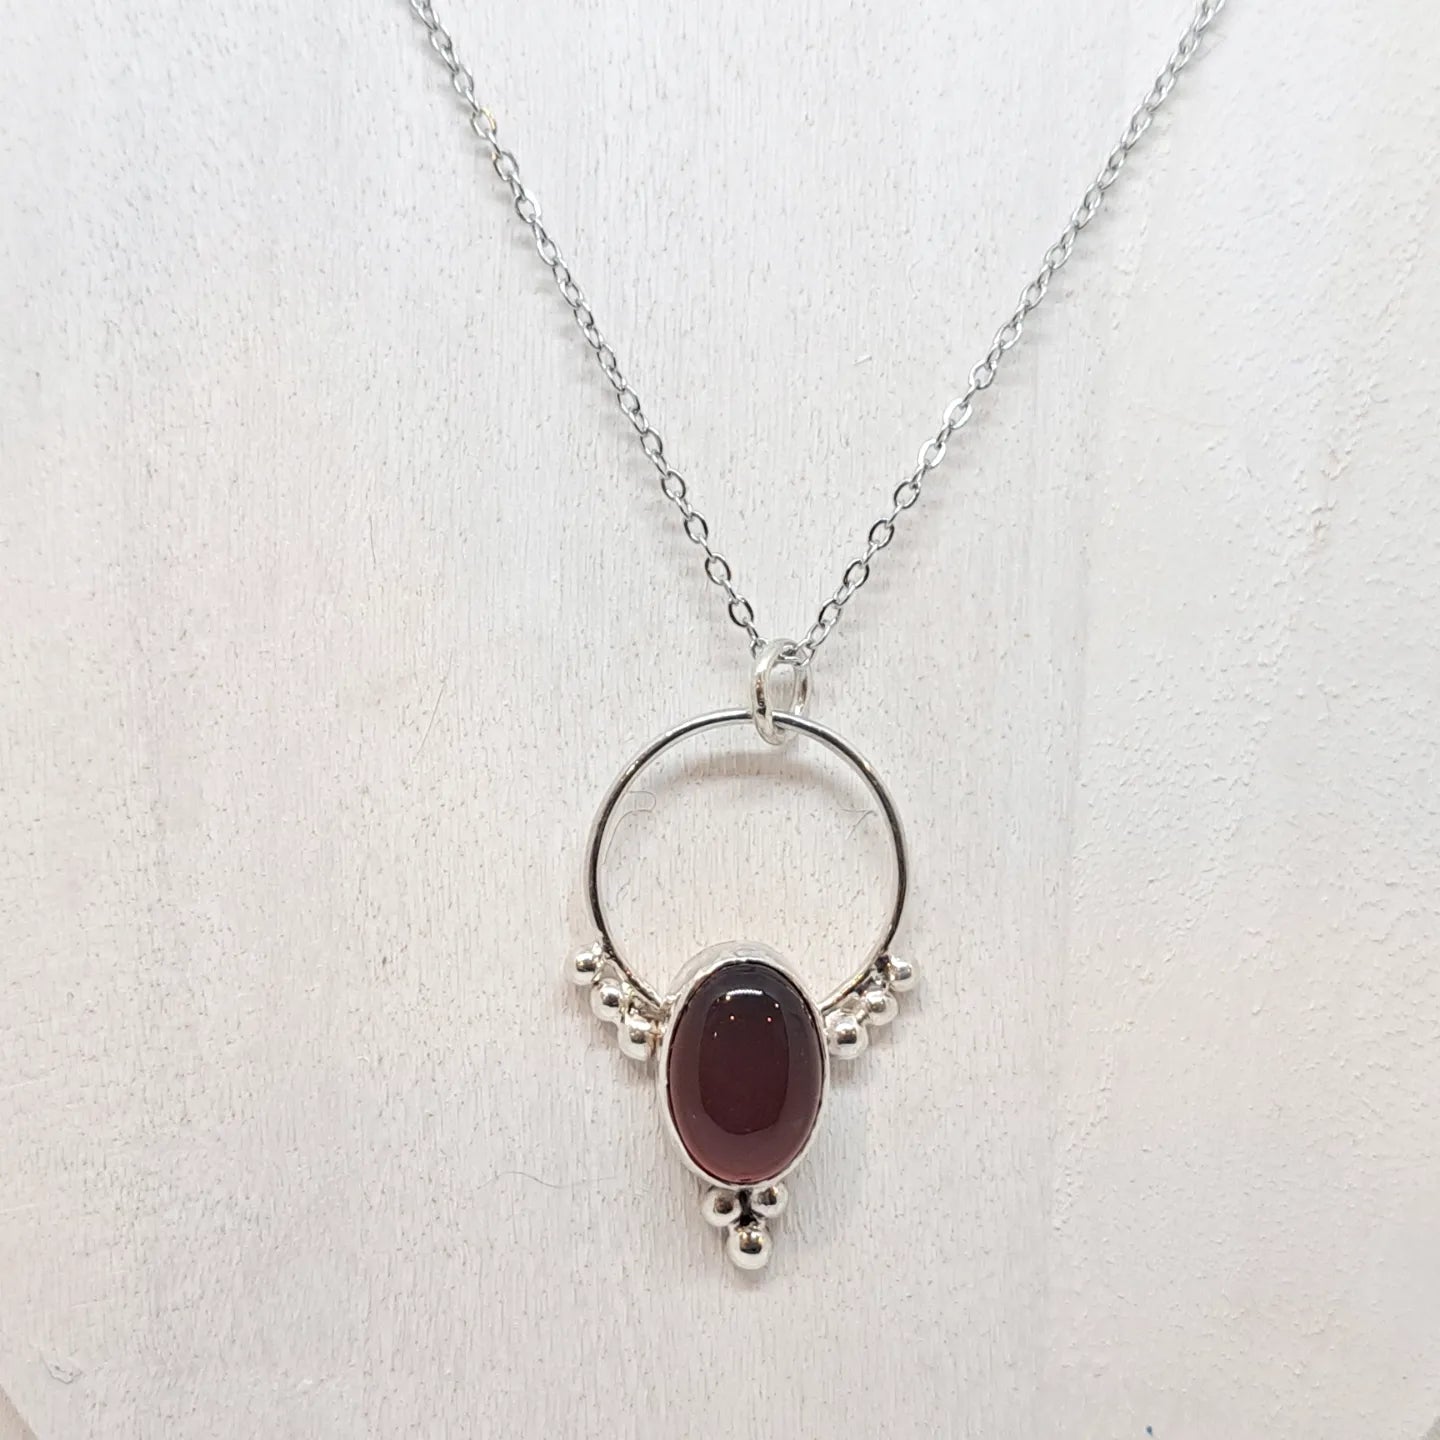 Red agate and silver pendant